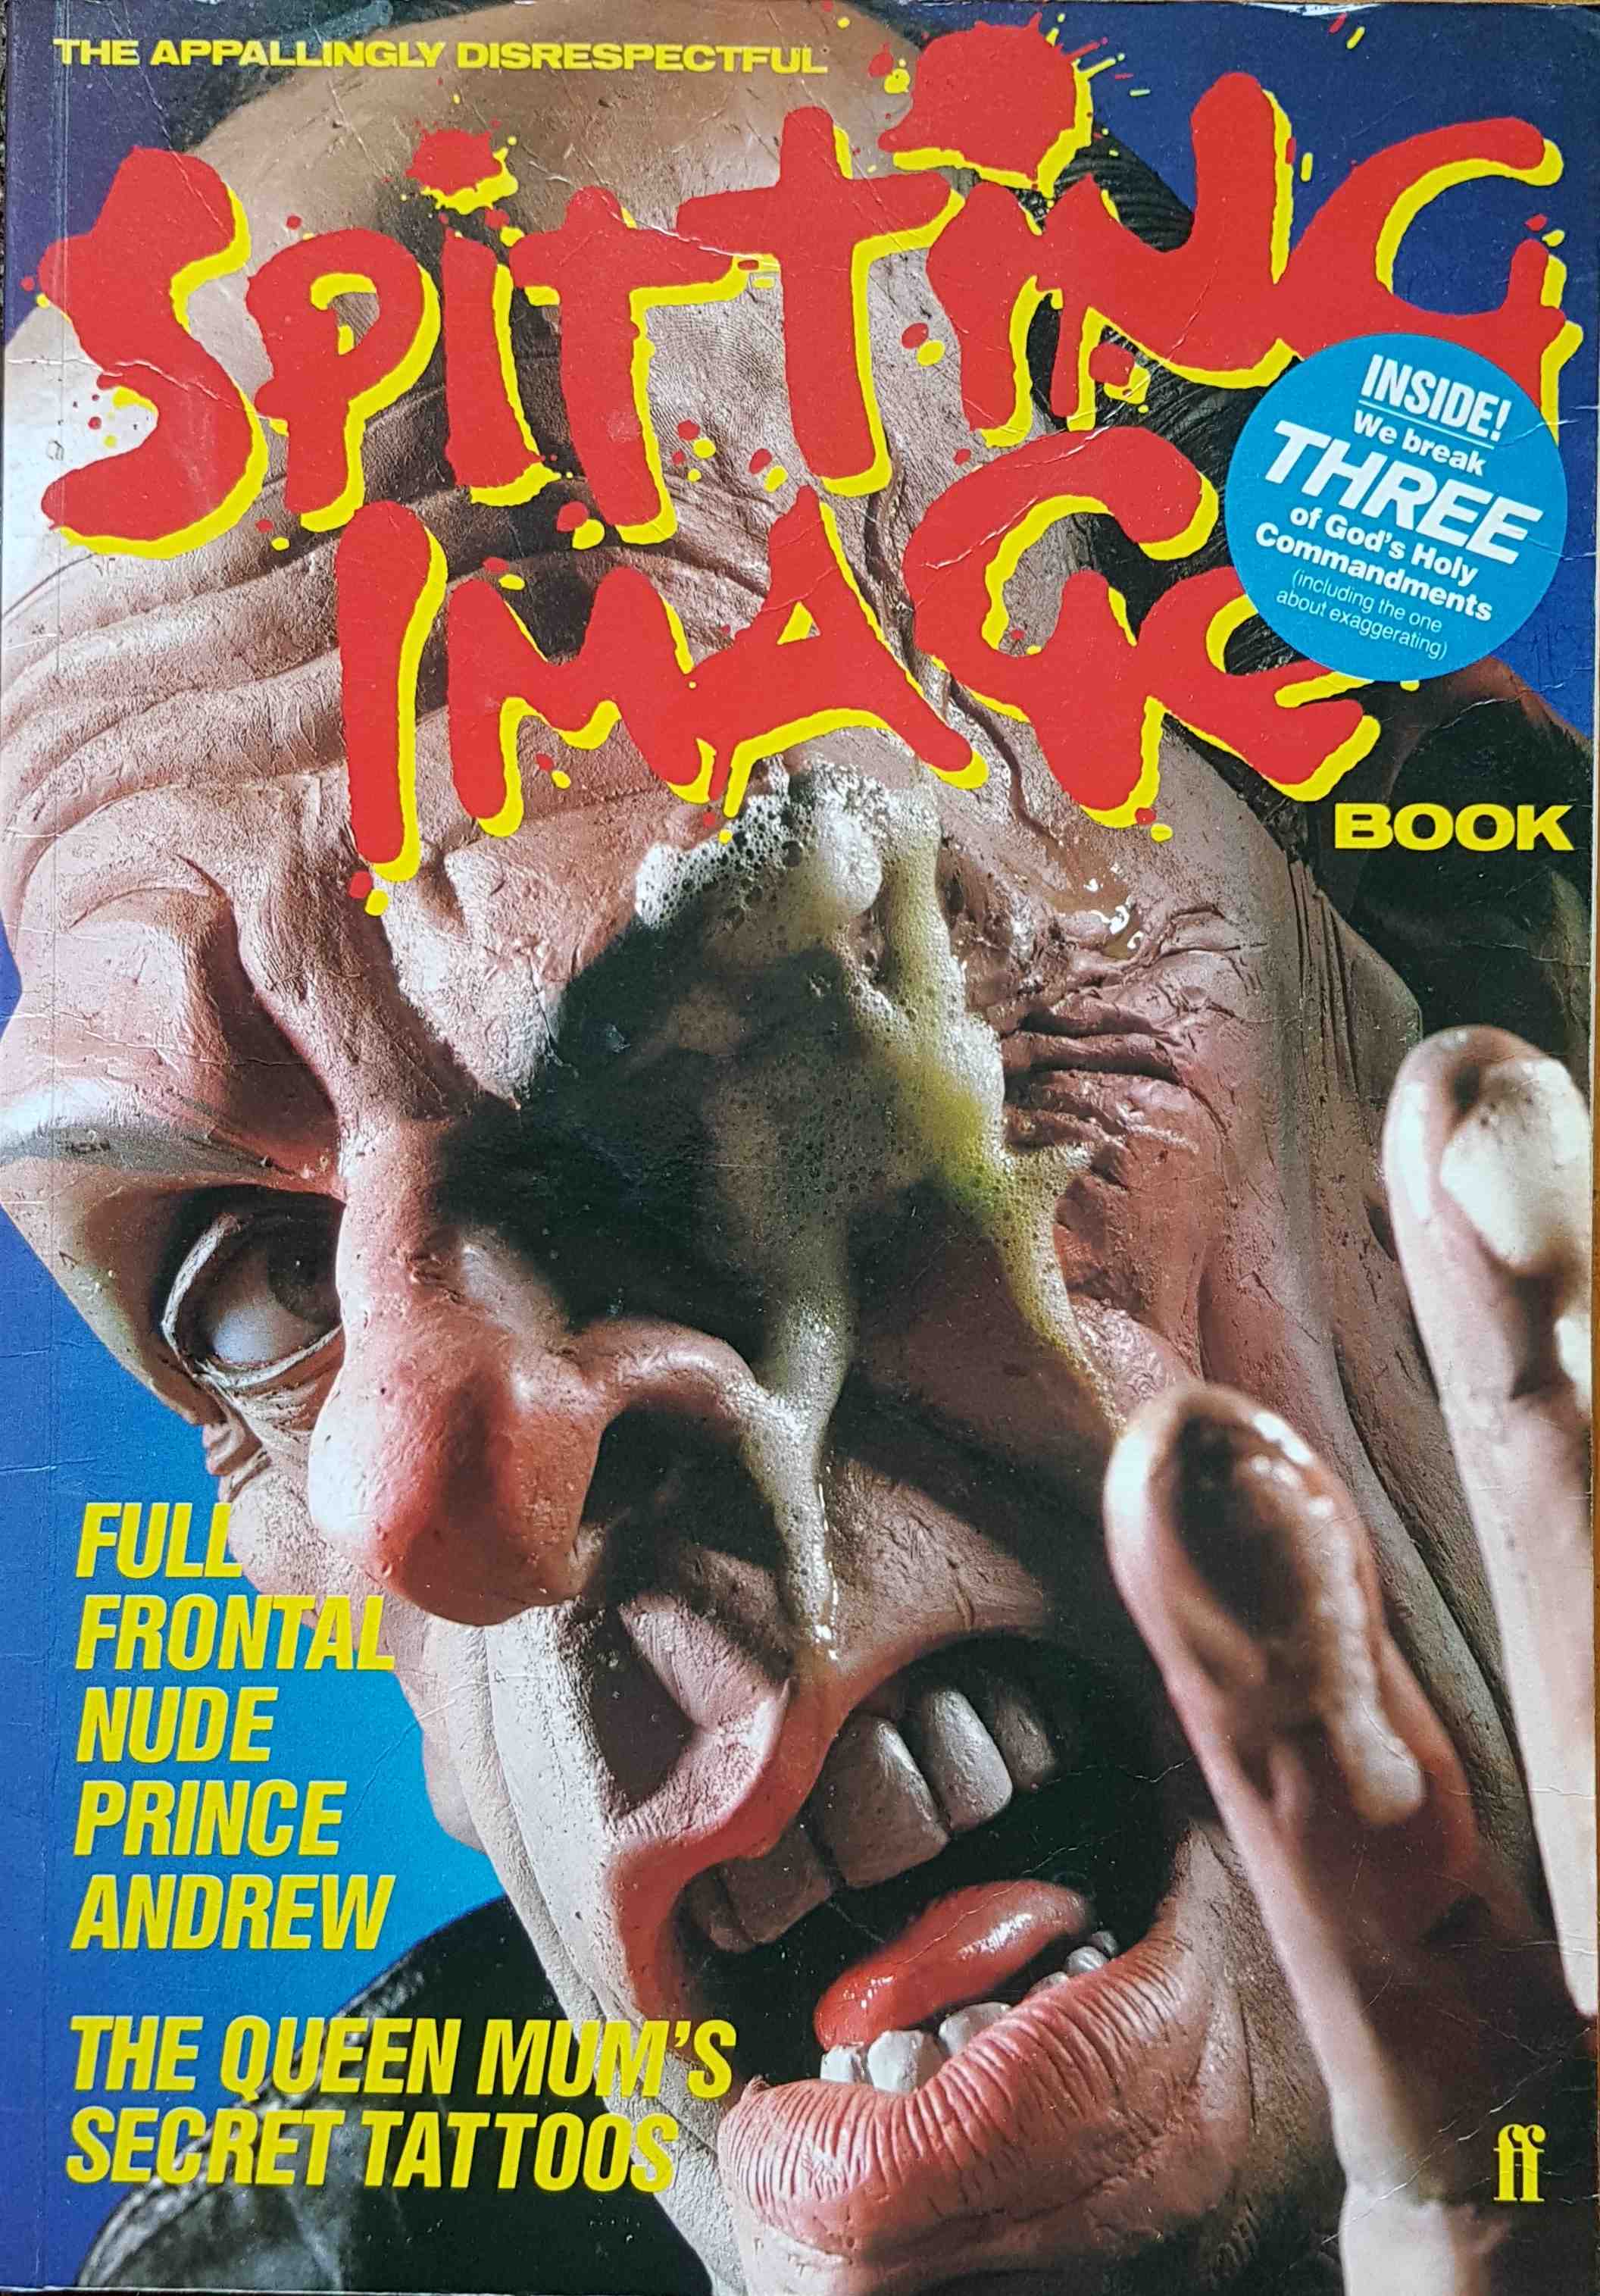 Picture of 0-571-13670-2 Spitting image book by artist Various from ITV, Channel 4 and Channel 5 library